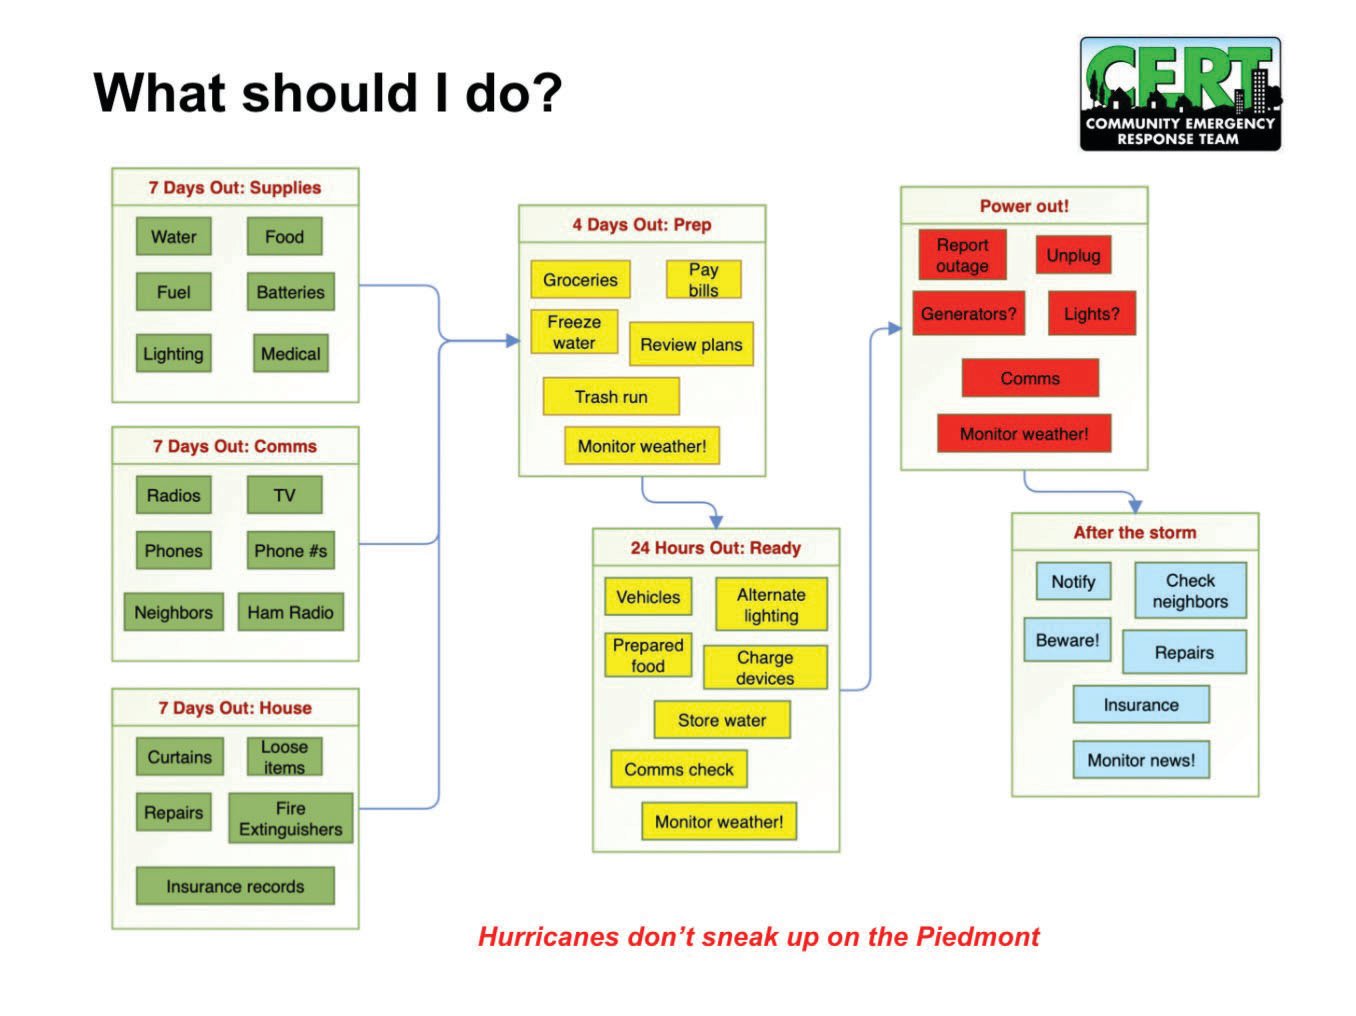 Resource outlining how to prepare for a hurricane during different time frames before the storm, from CERT’s 2021 hurricane preparation presentation.